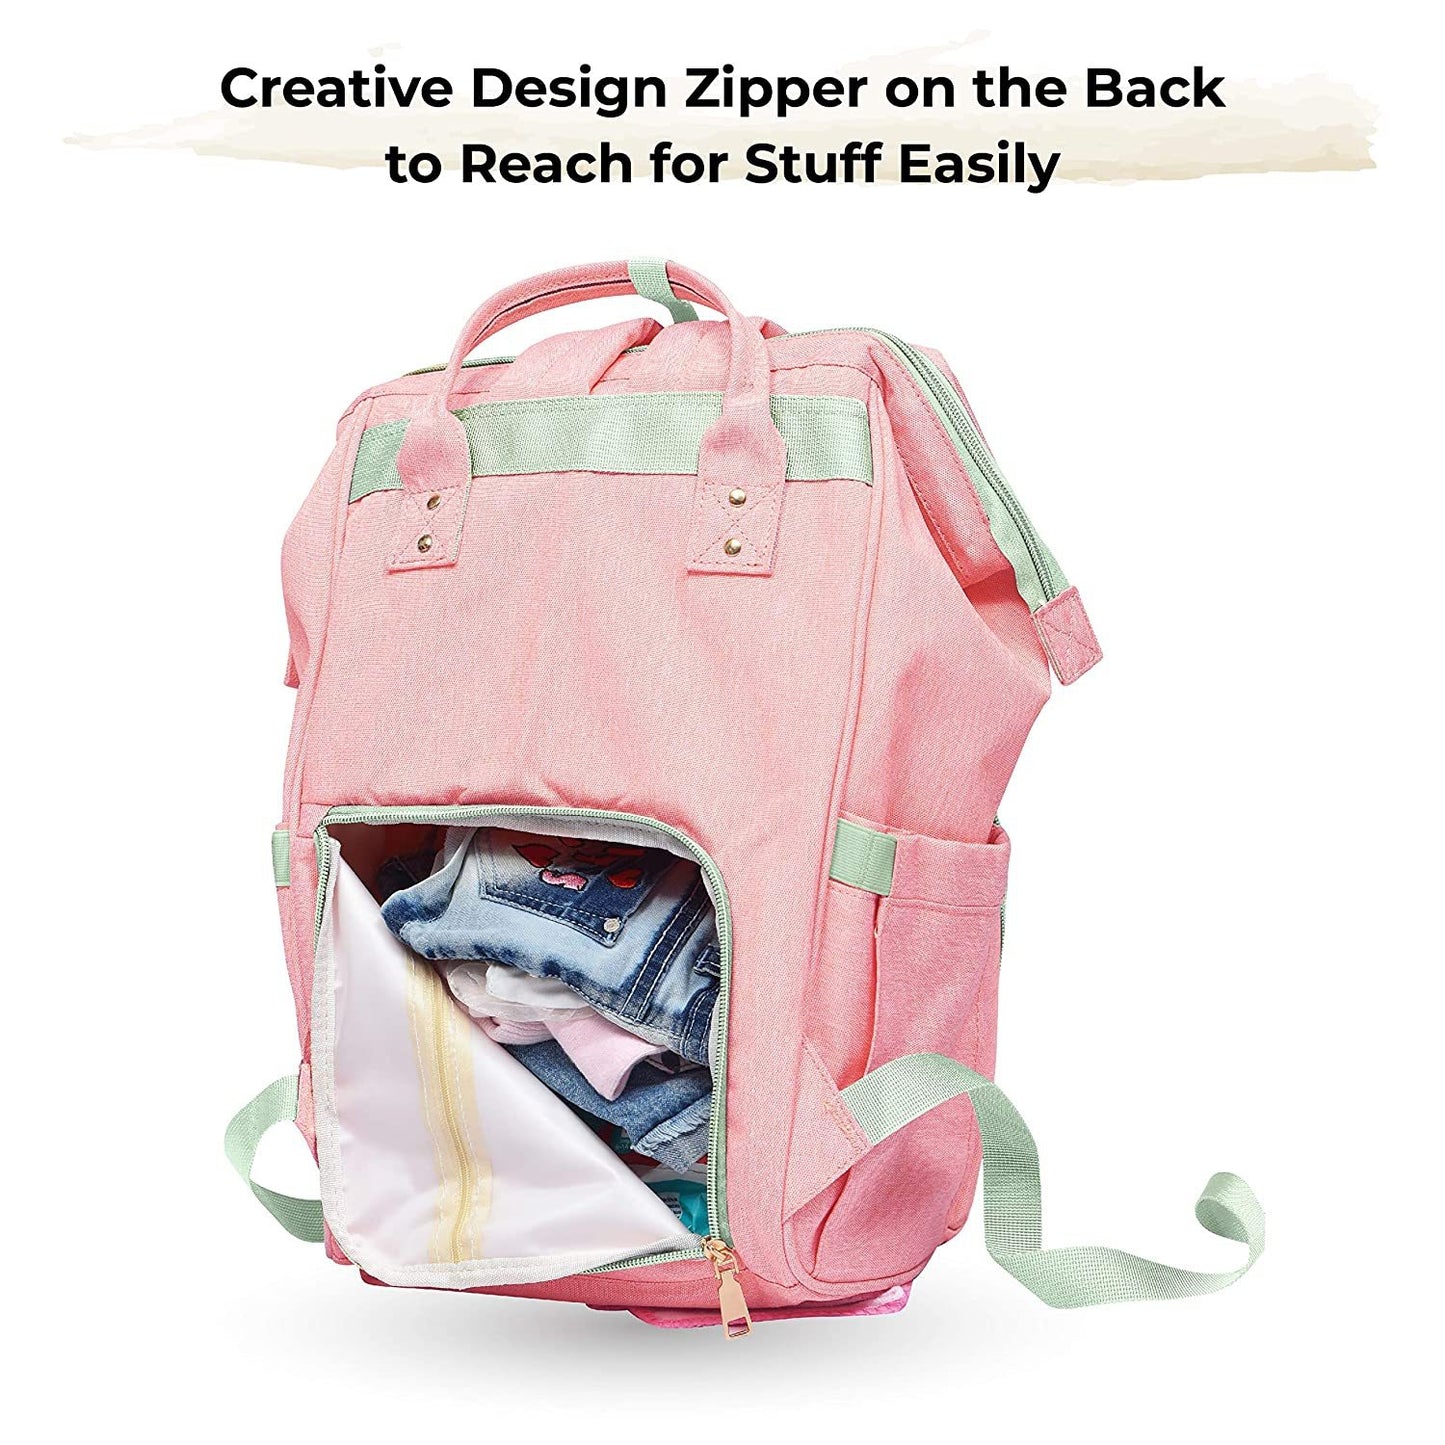 Little Pumpkin Classic Diaper Bags Backpack for Mothers